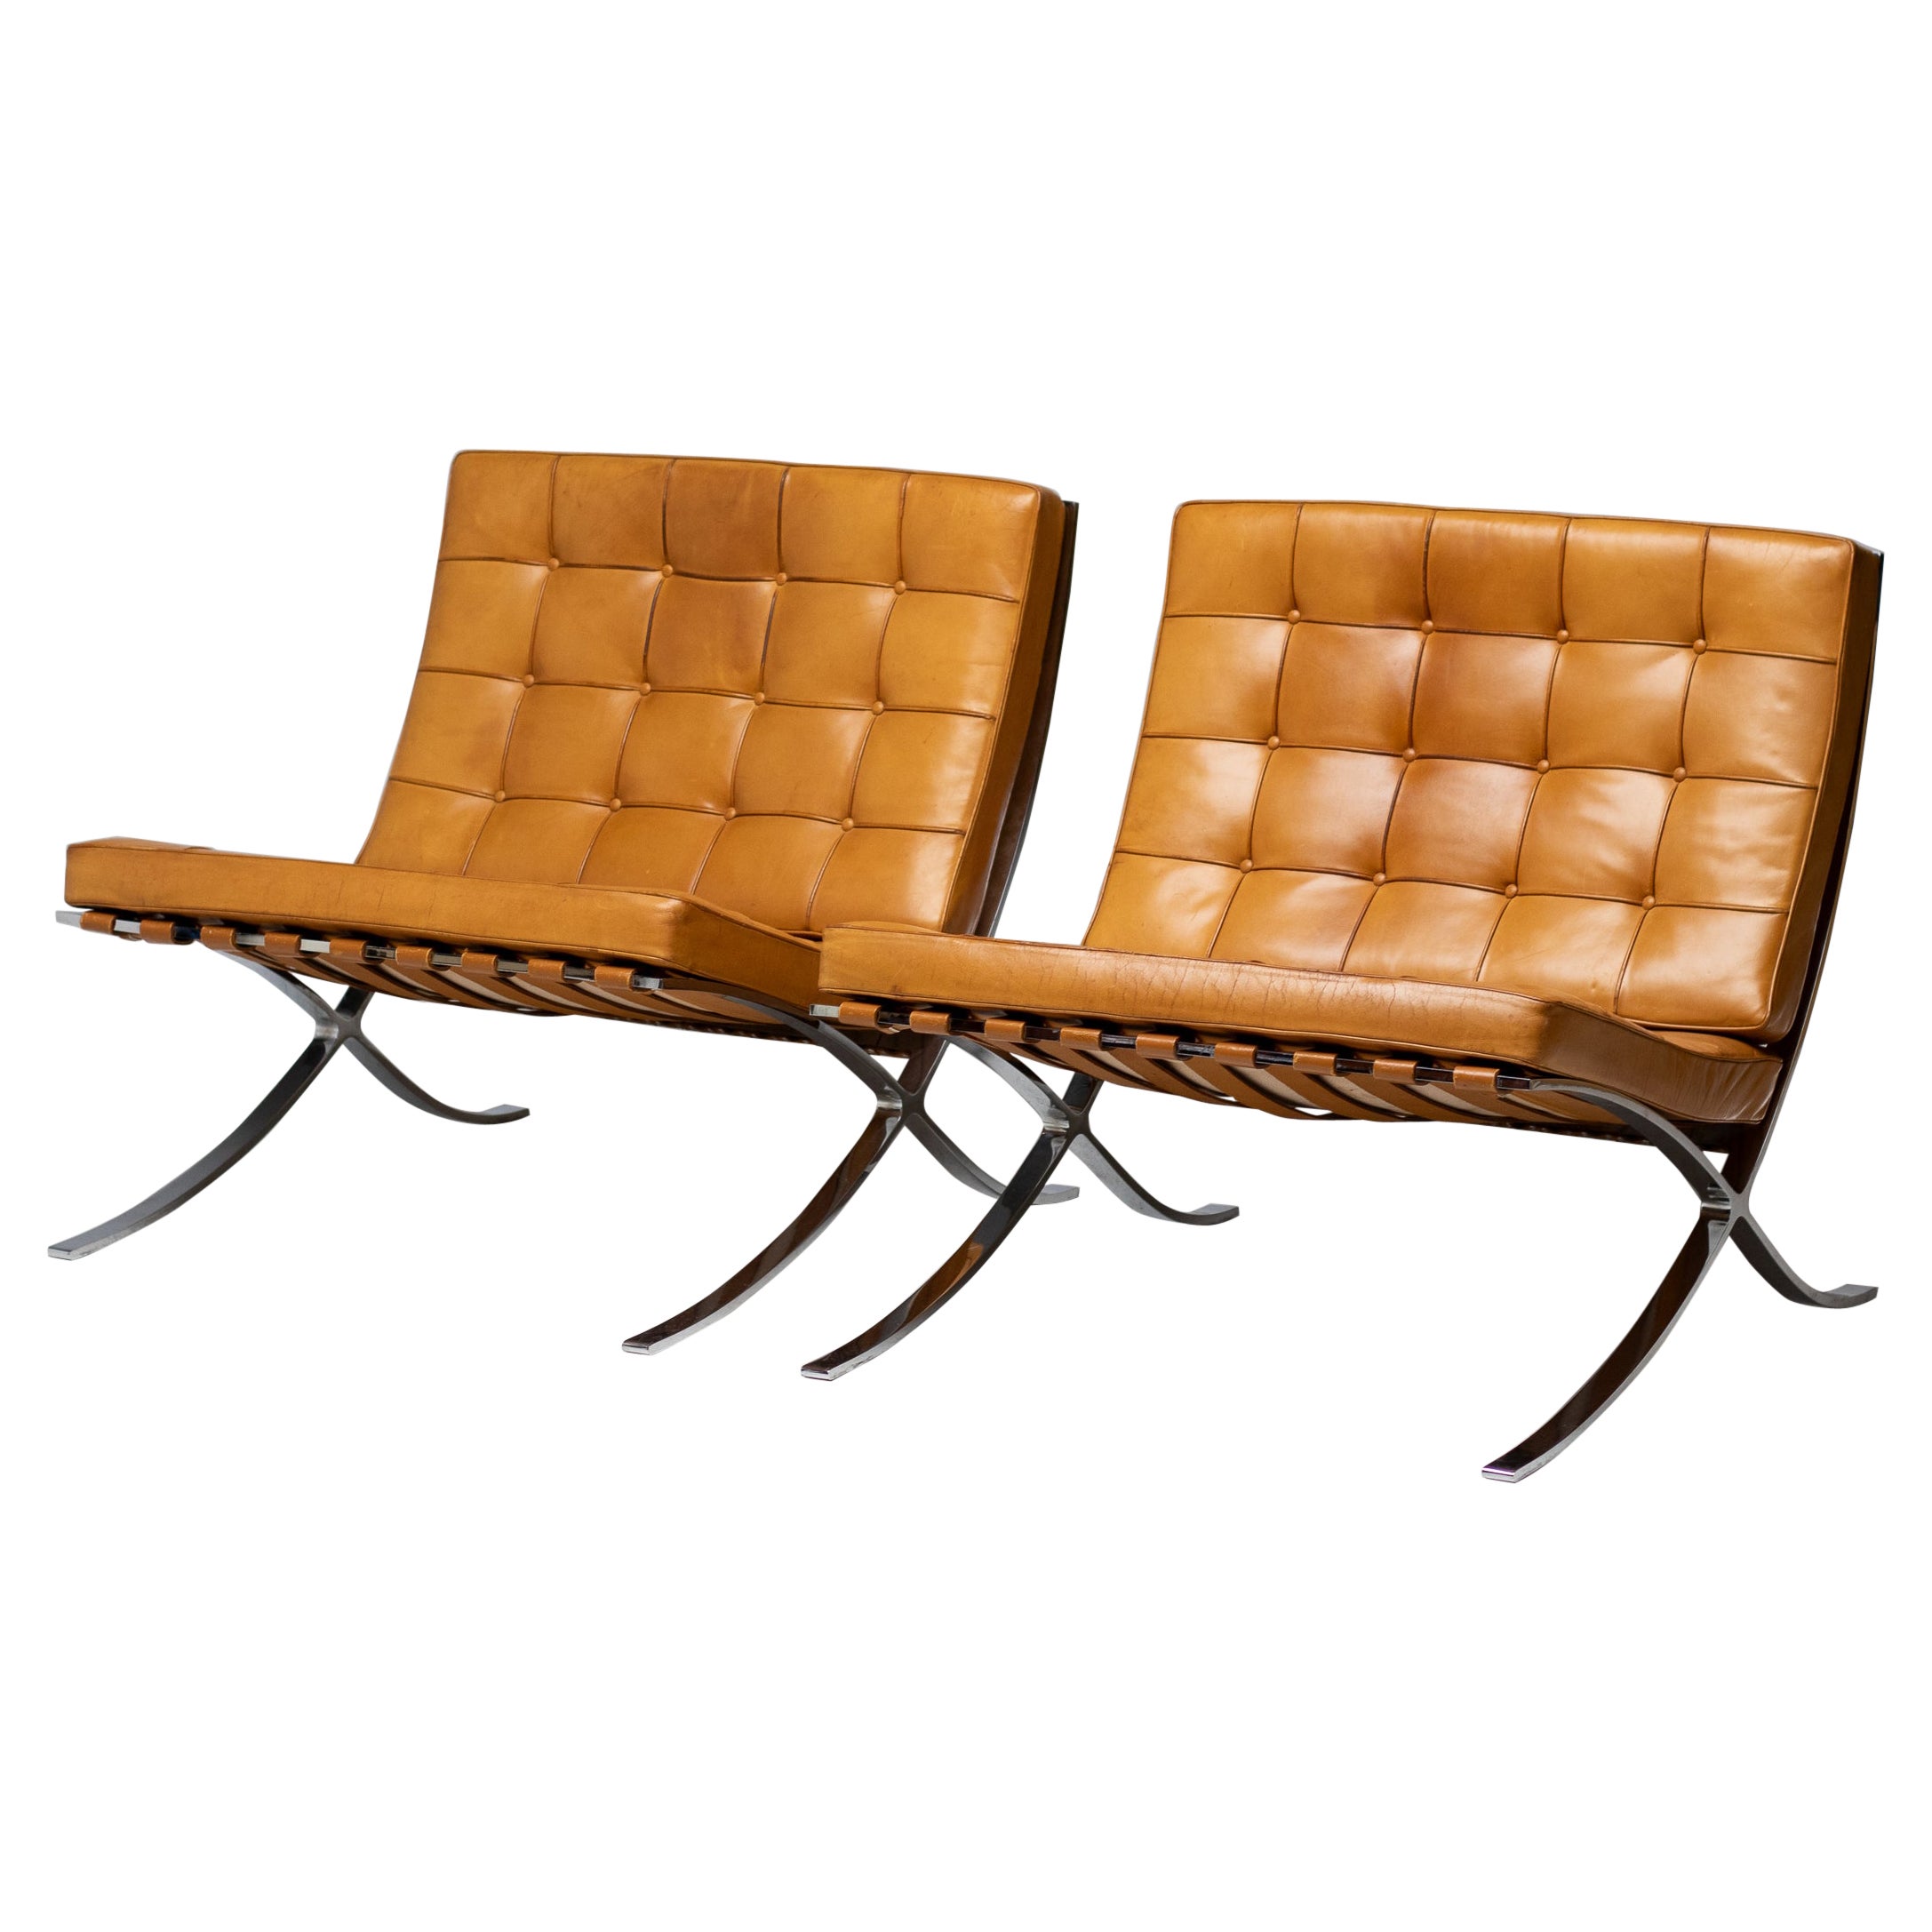 Pair of Knoll Cognac Leather Mies van der Rohe Split Frame Barcelona Chairs